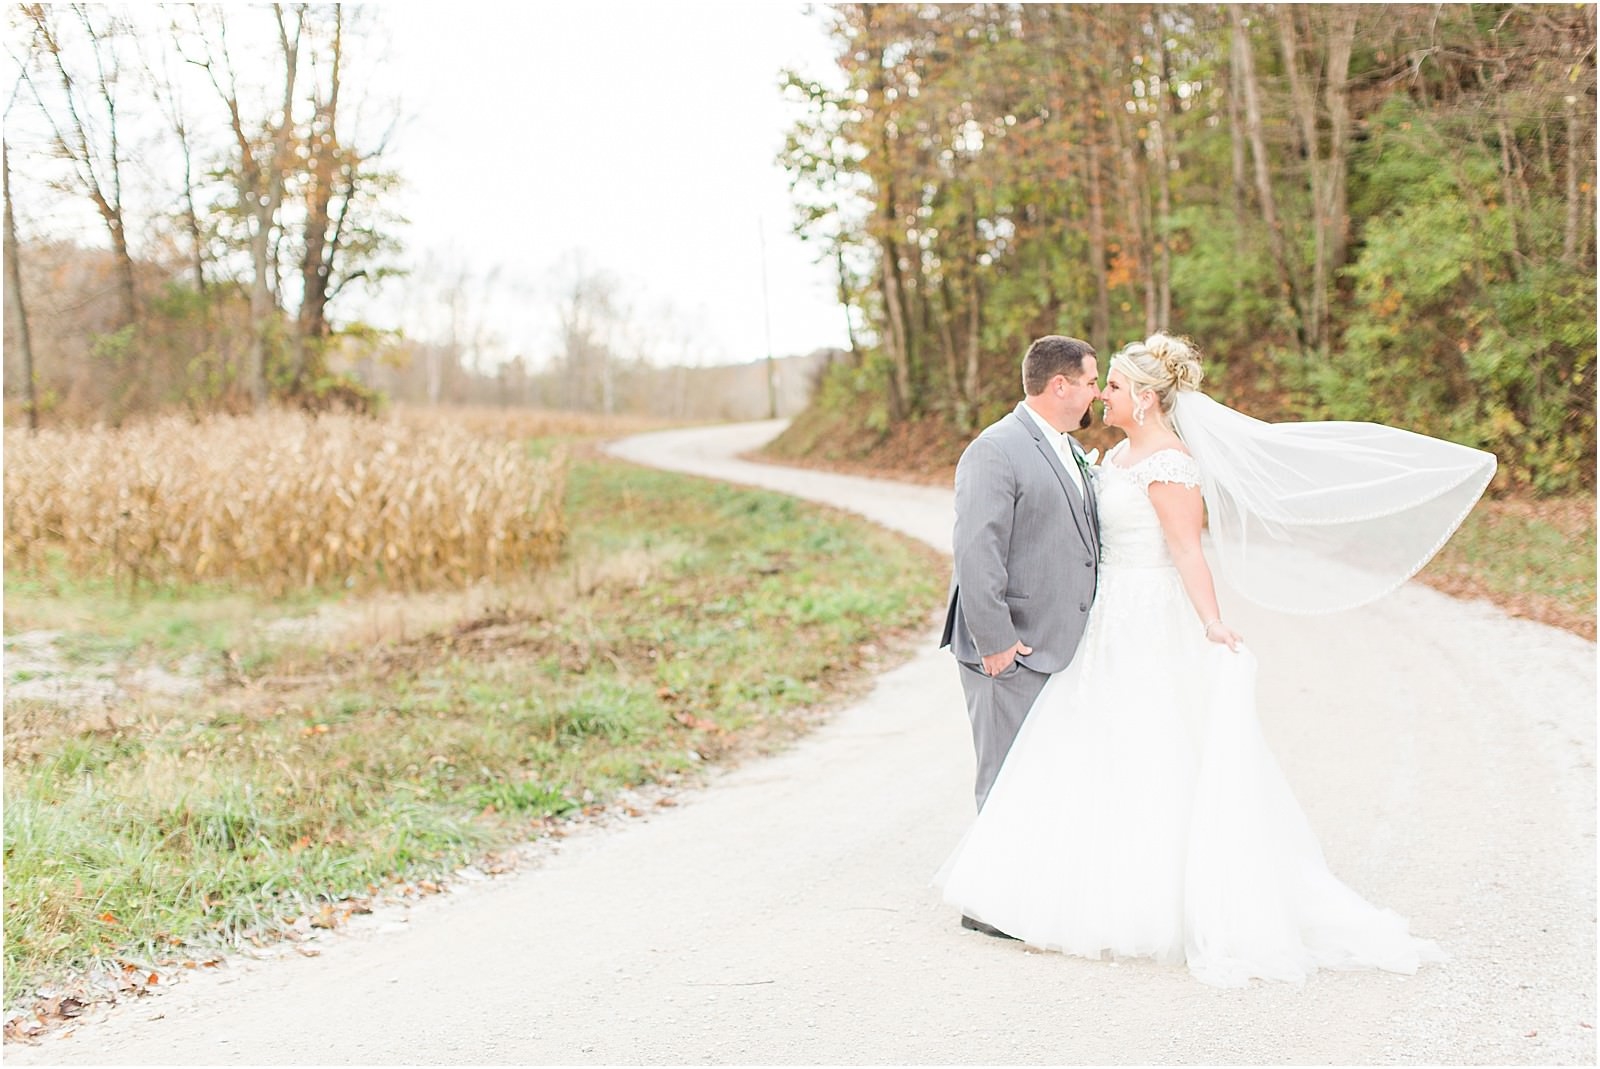 A Navy and Blush Wedding in Tell City Indiana | Brianna and Matt | Bret and Brandie Photography 0125.jpg